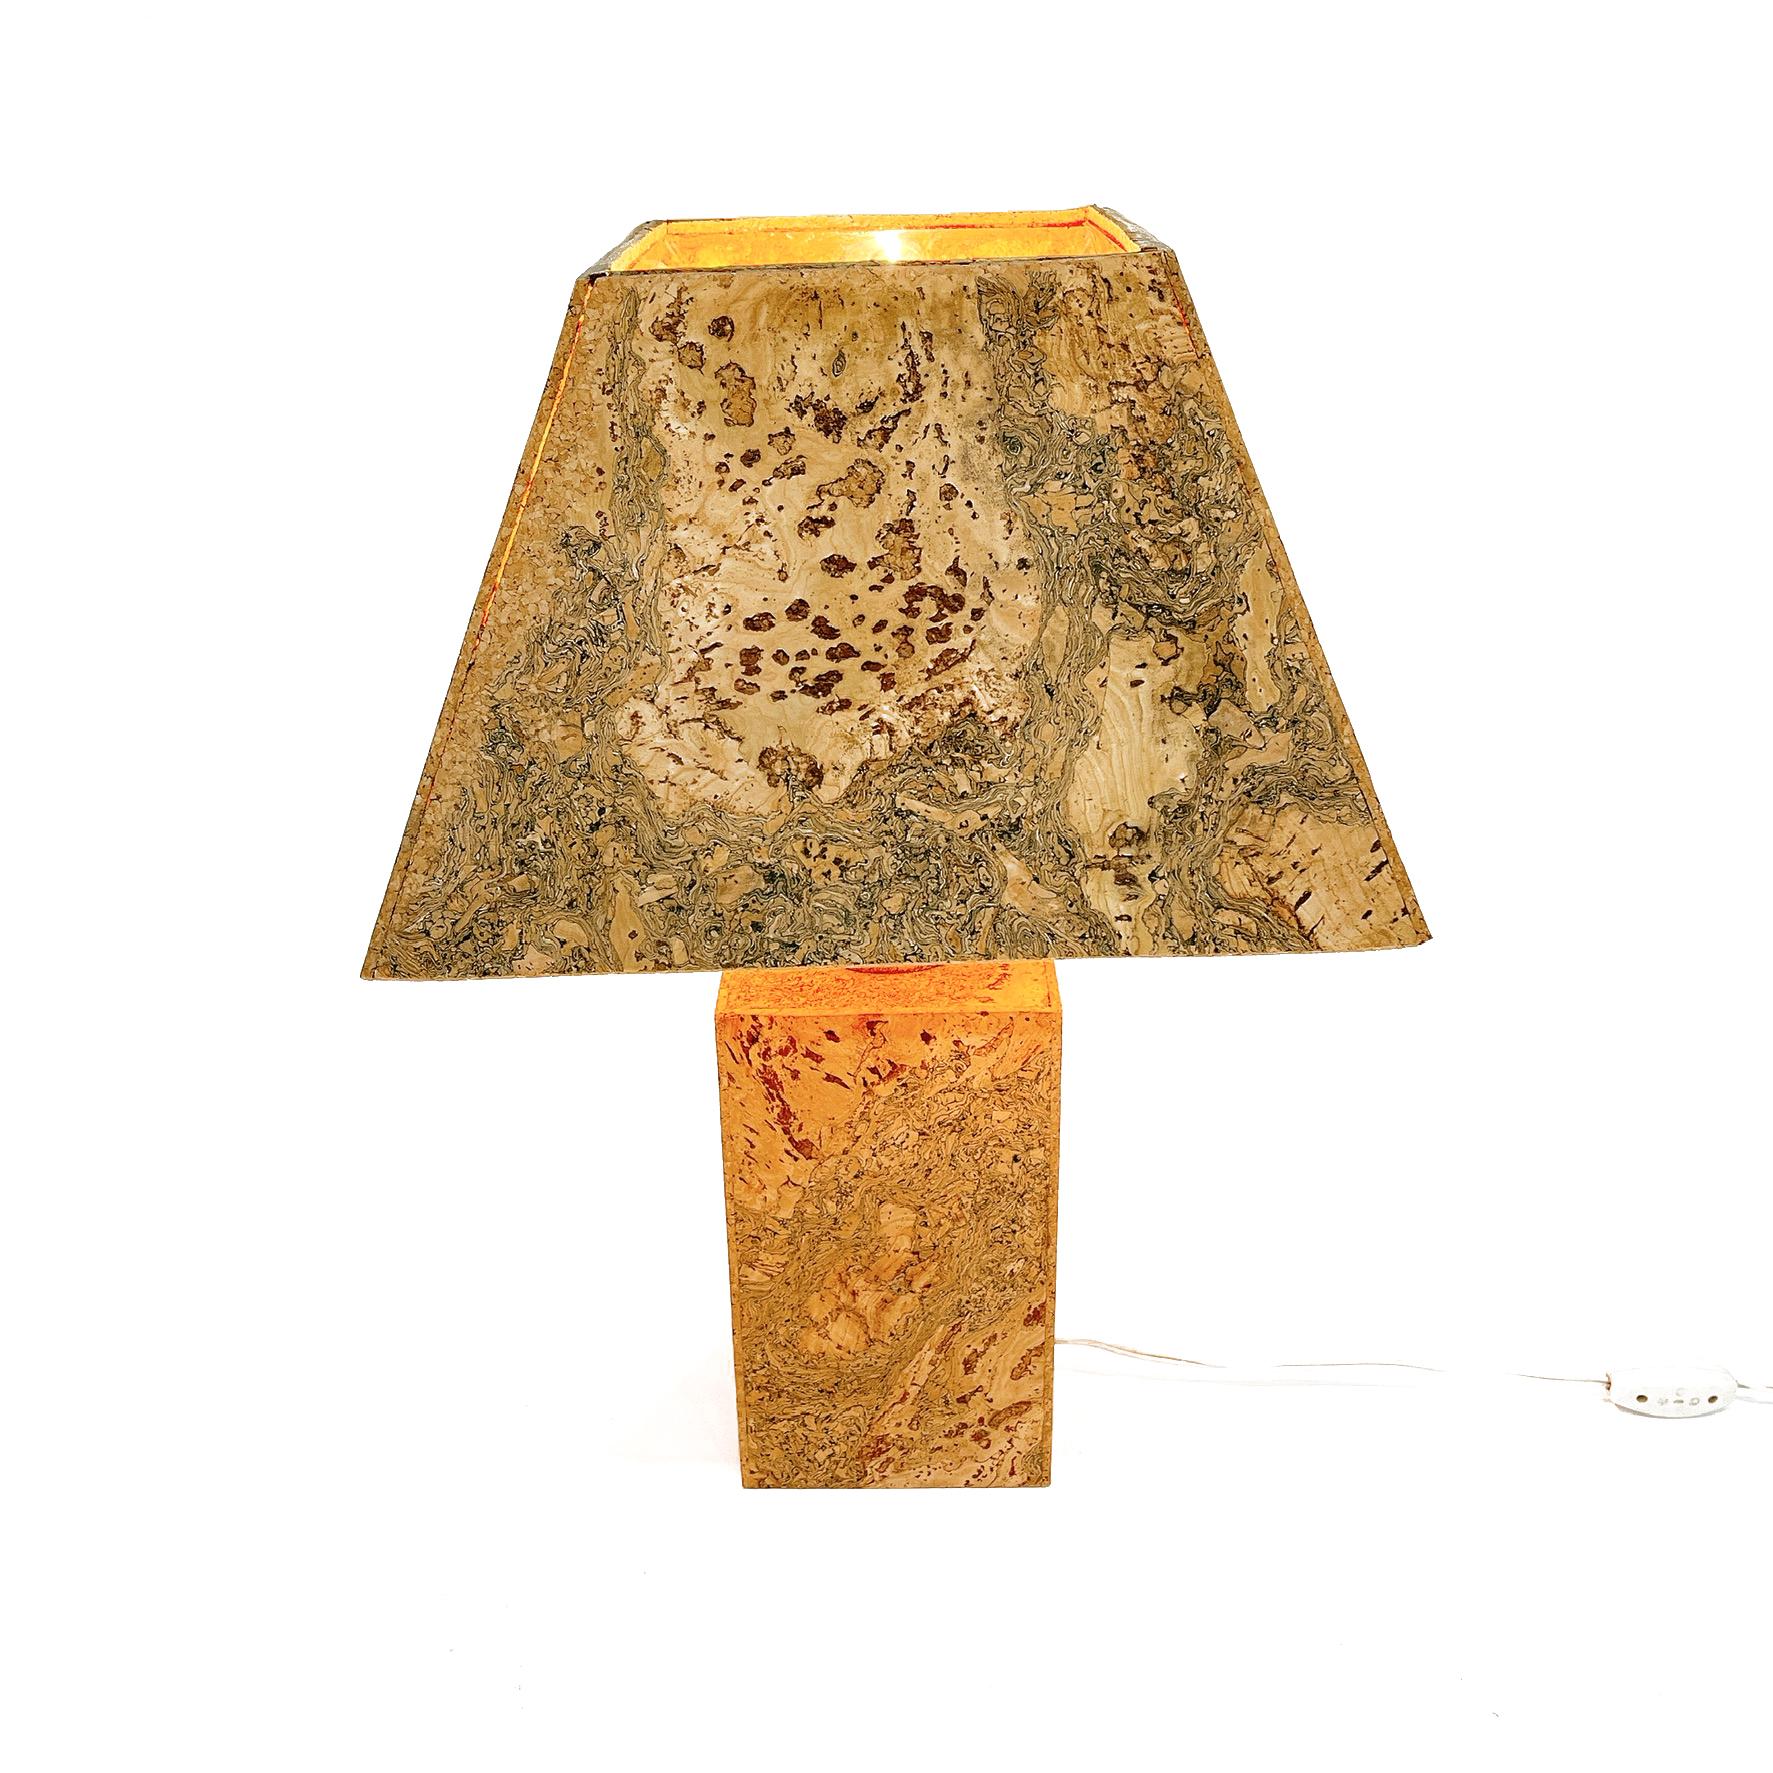 A german table lamp made in the 1960s. The lighting has an exceptional design which is similar to the table lamps made by Ingo Maurer. It is made of cork. 